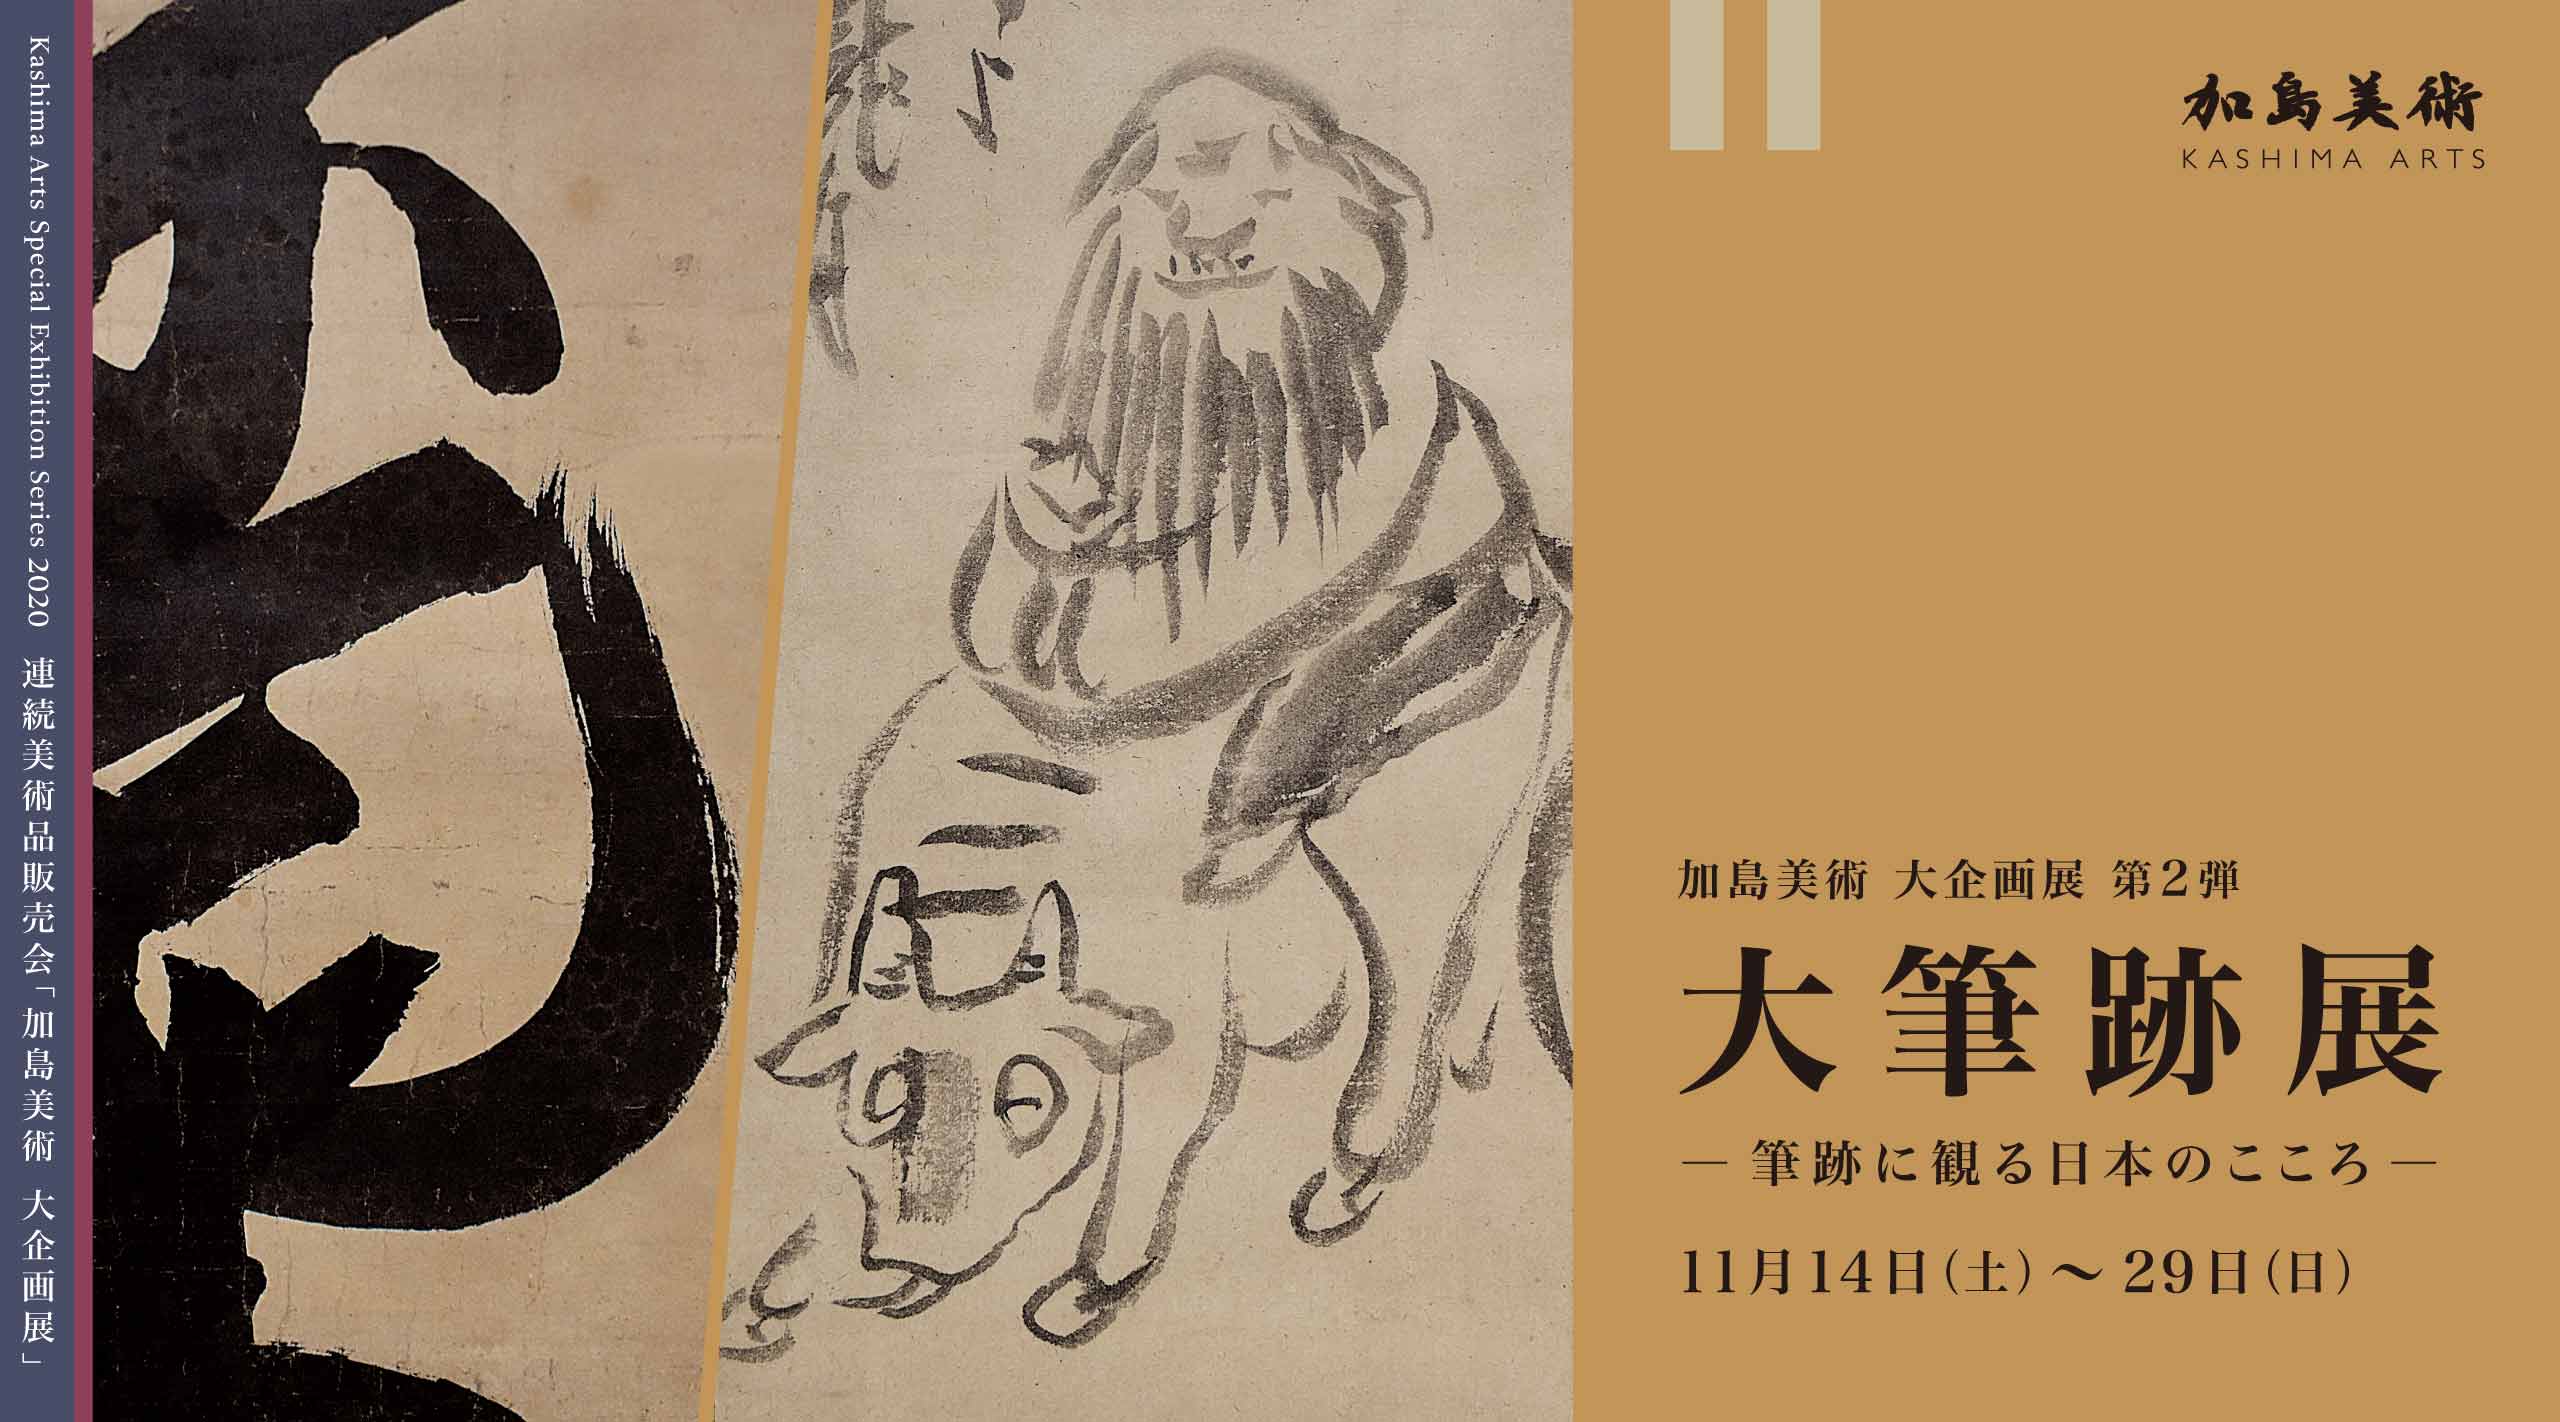 Calligraphy: An Examination of the Japanese Spirit